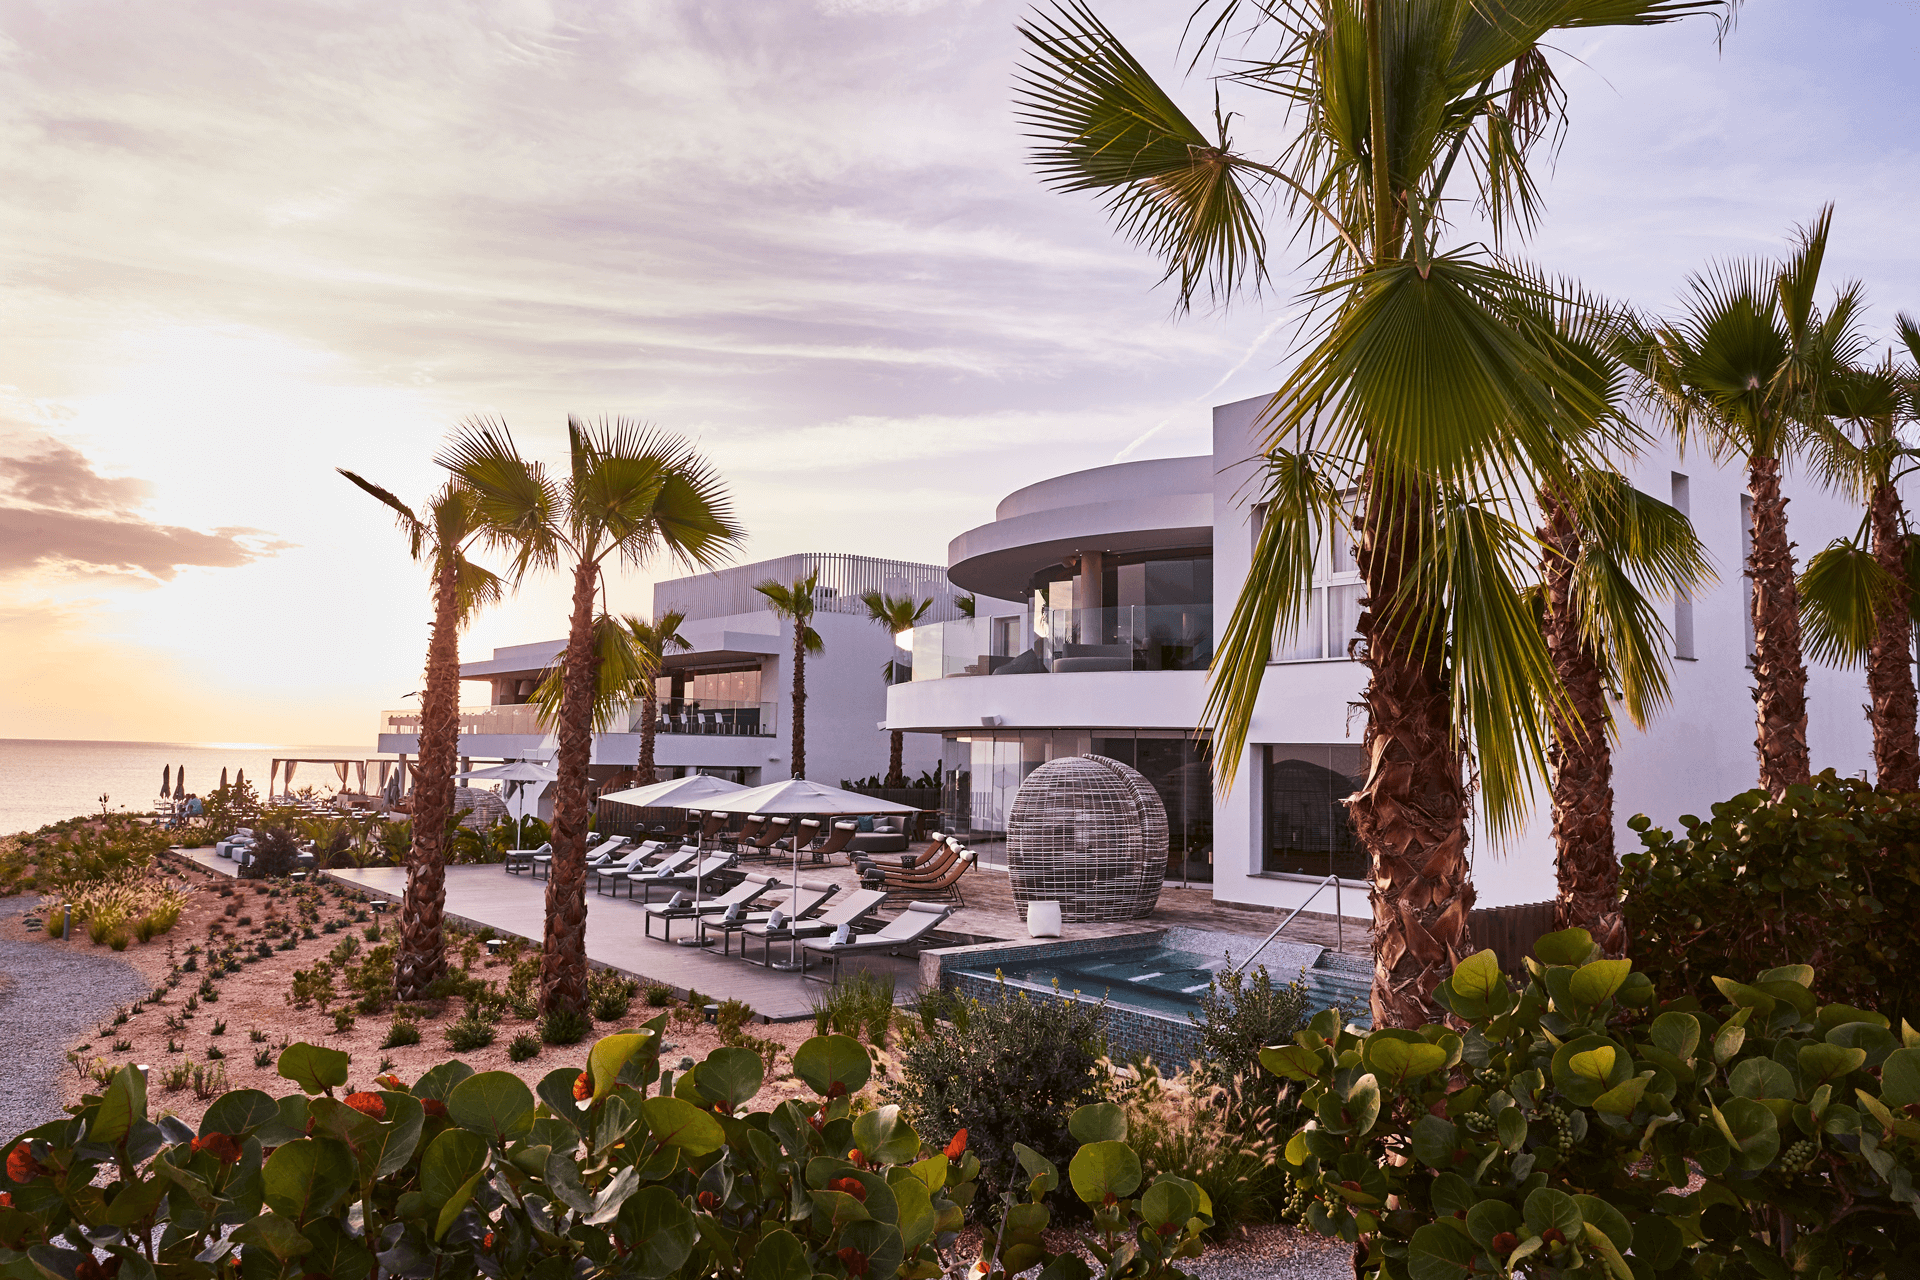 A peaceful poolside view with a building and palm trees